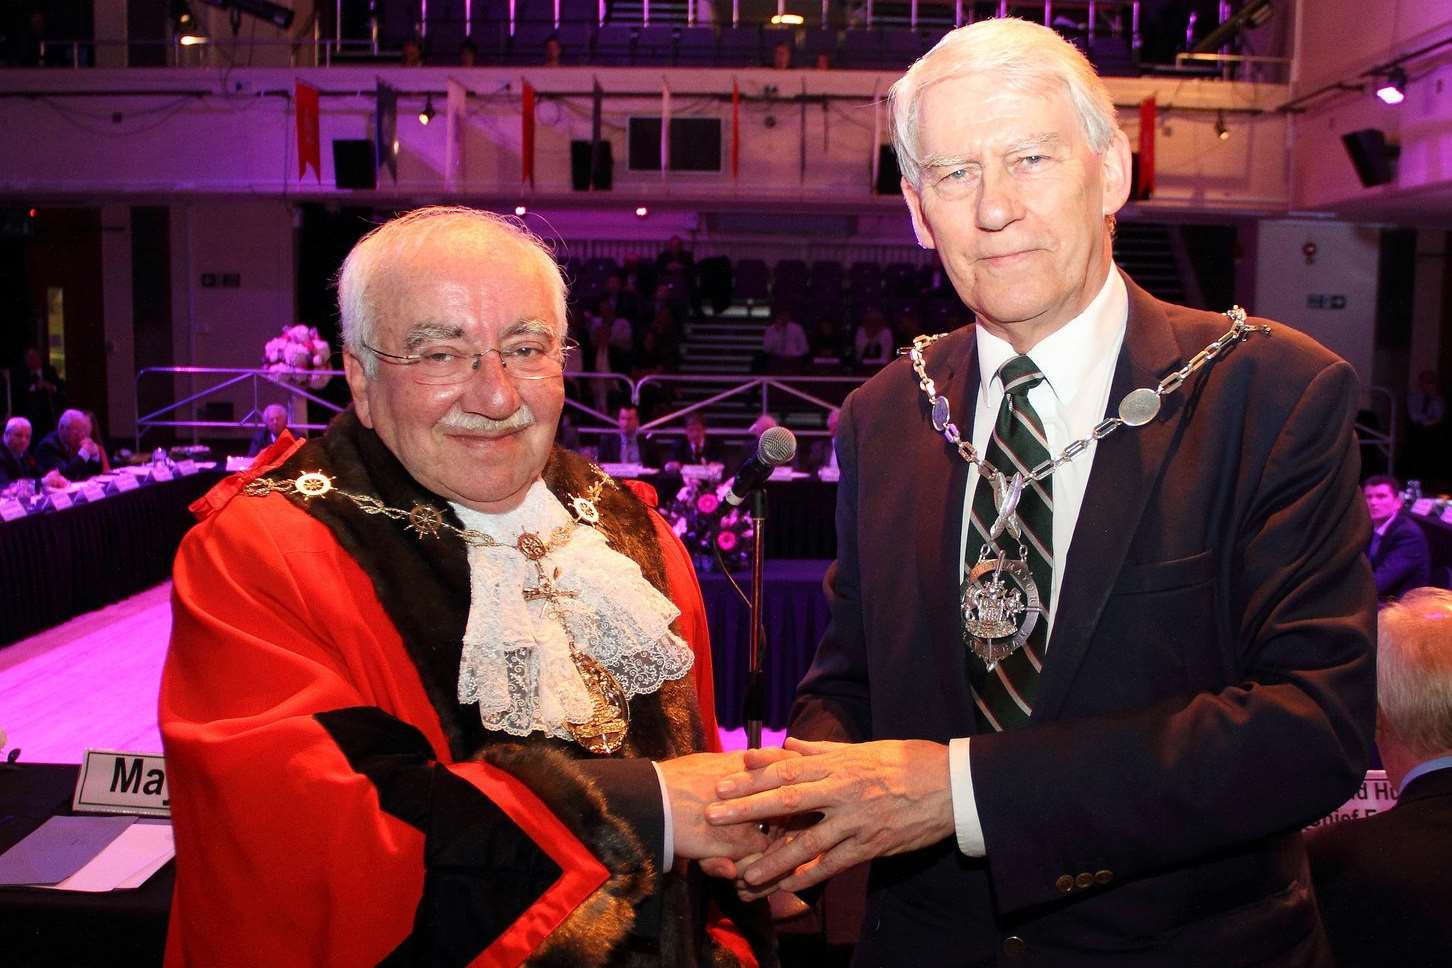 Cllr David Hurley was announced as the new deputy mayor of Gravesham. Picture: Gravesham Borough Council